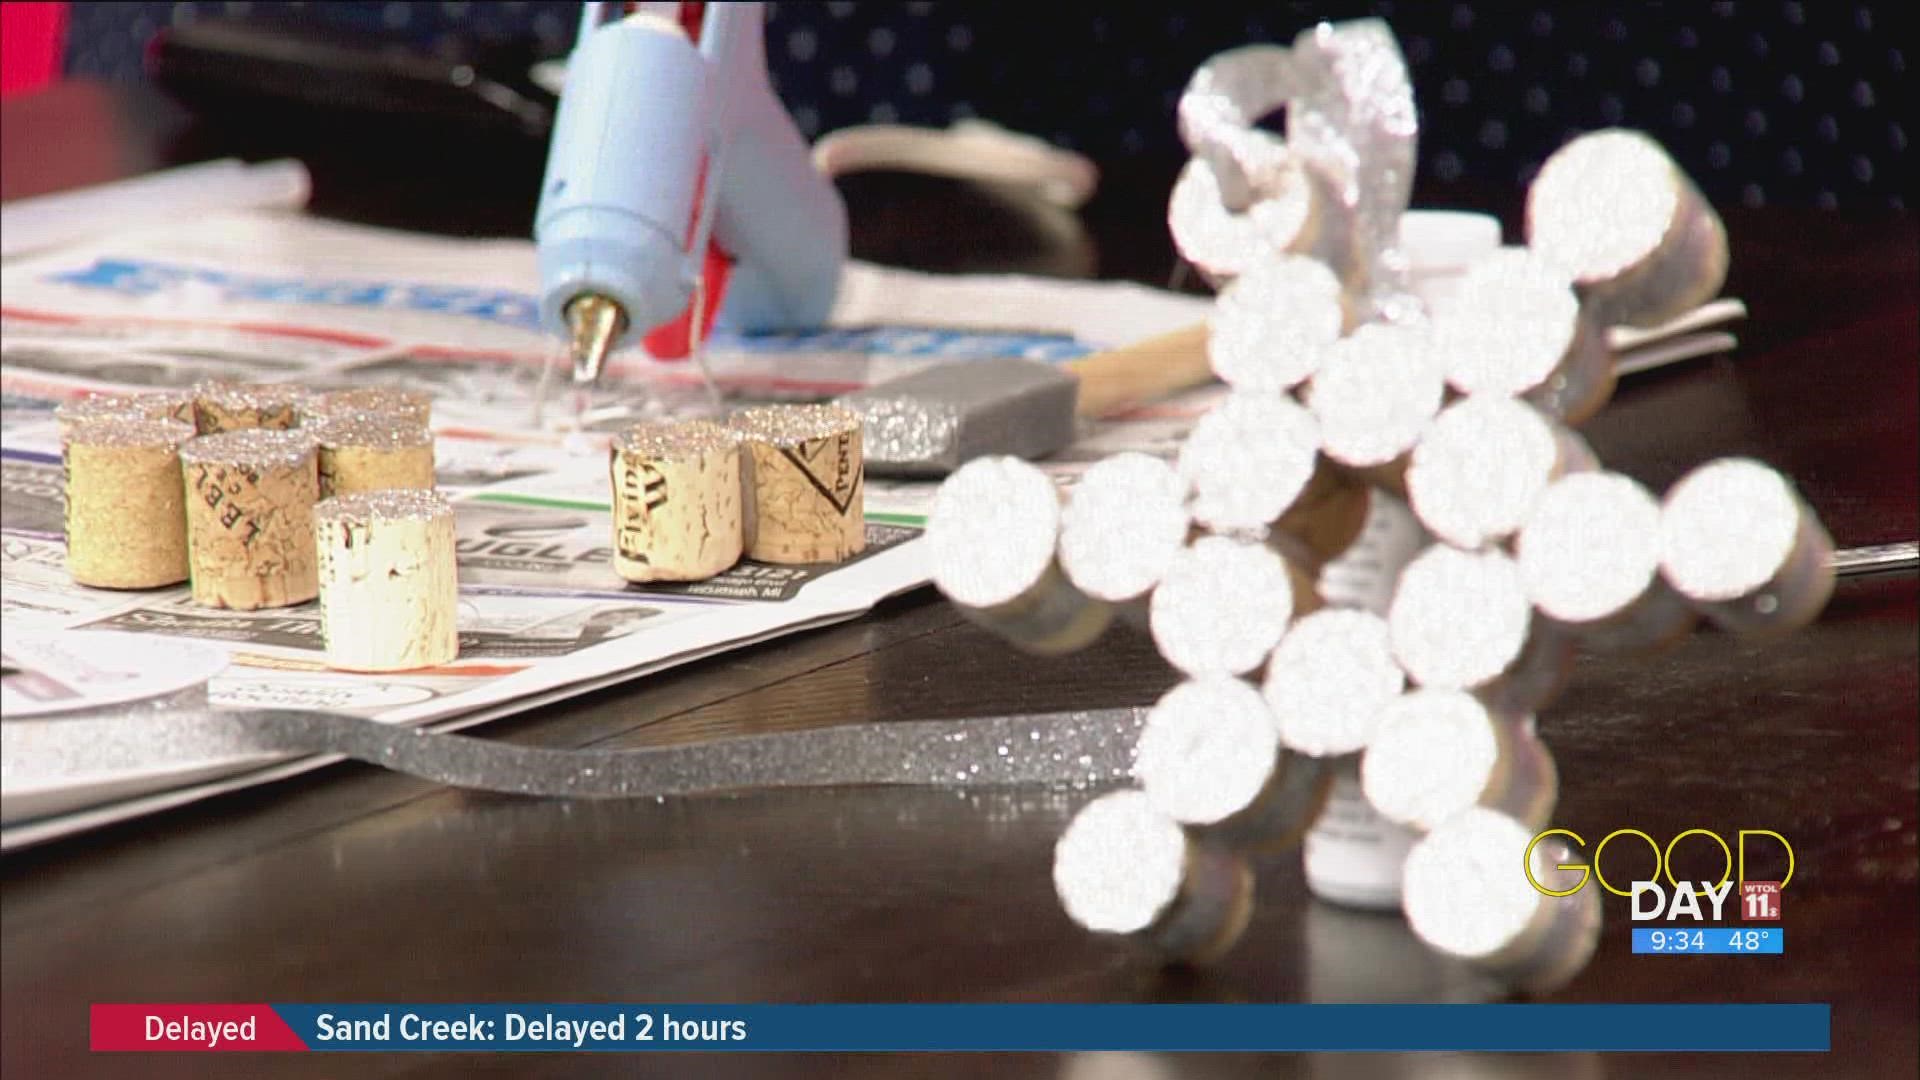 Amanda and Diane make up for the lack of snow this winter by making some snowflakes out of old wine corks.